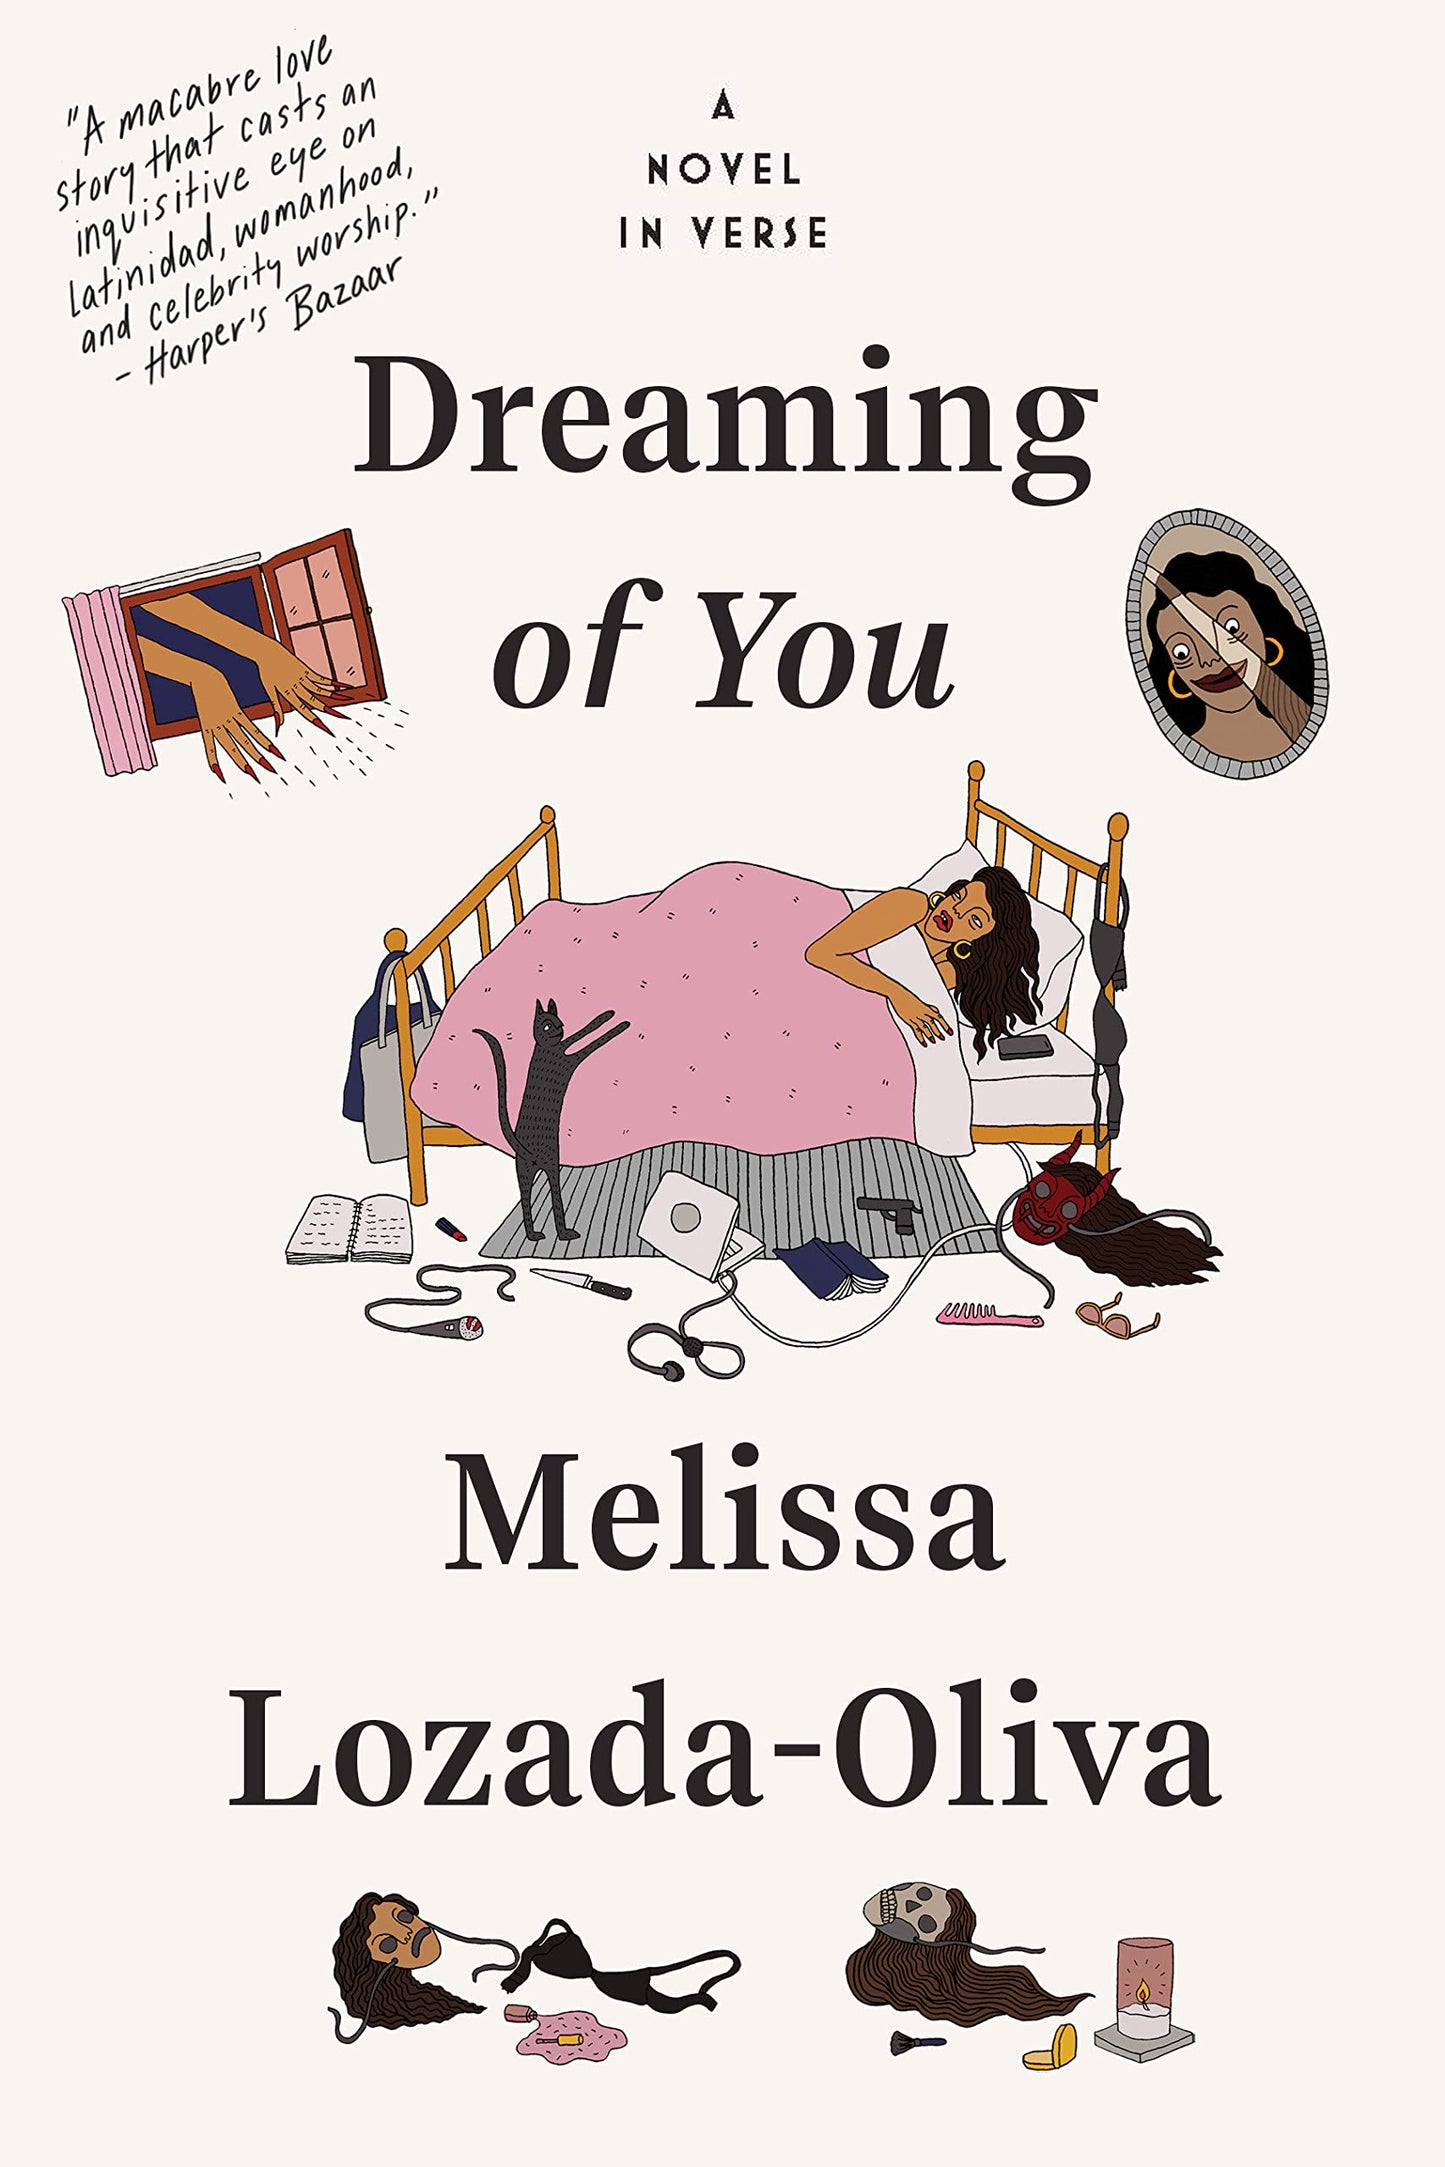 Dreaming of You // A Novel in Verse